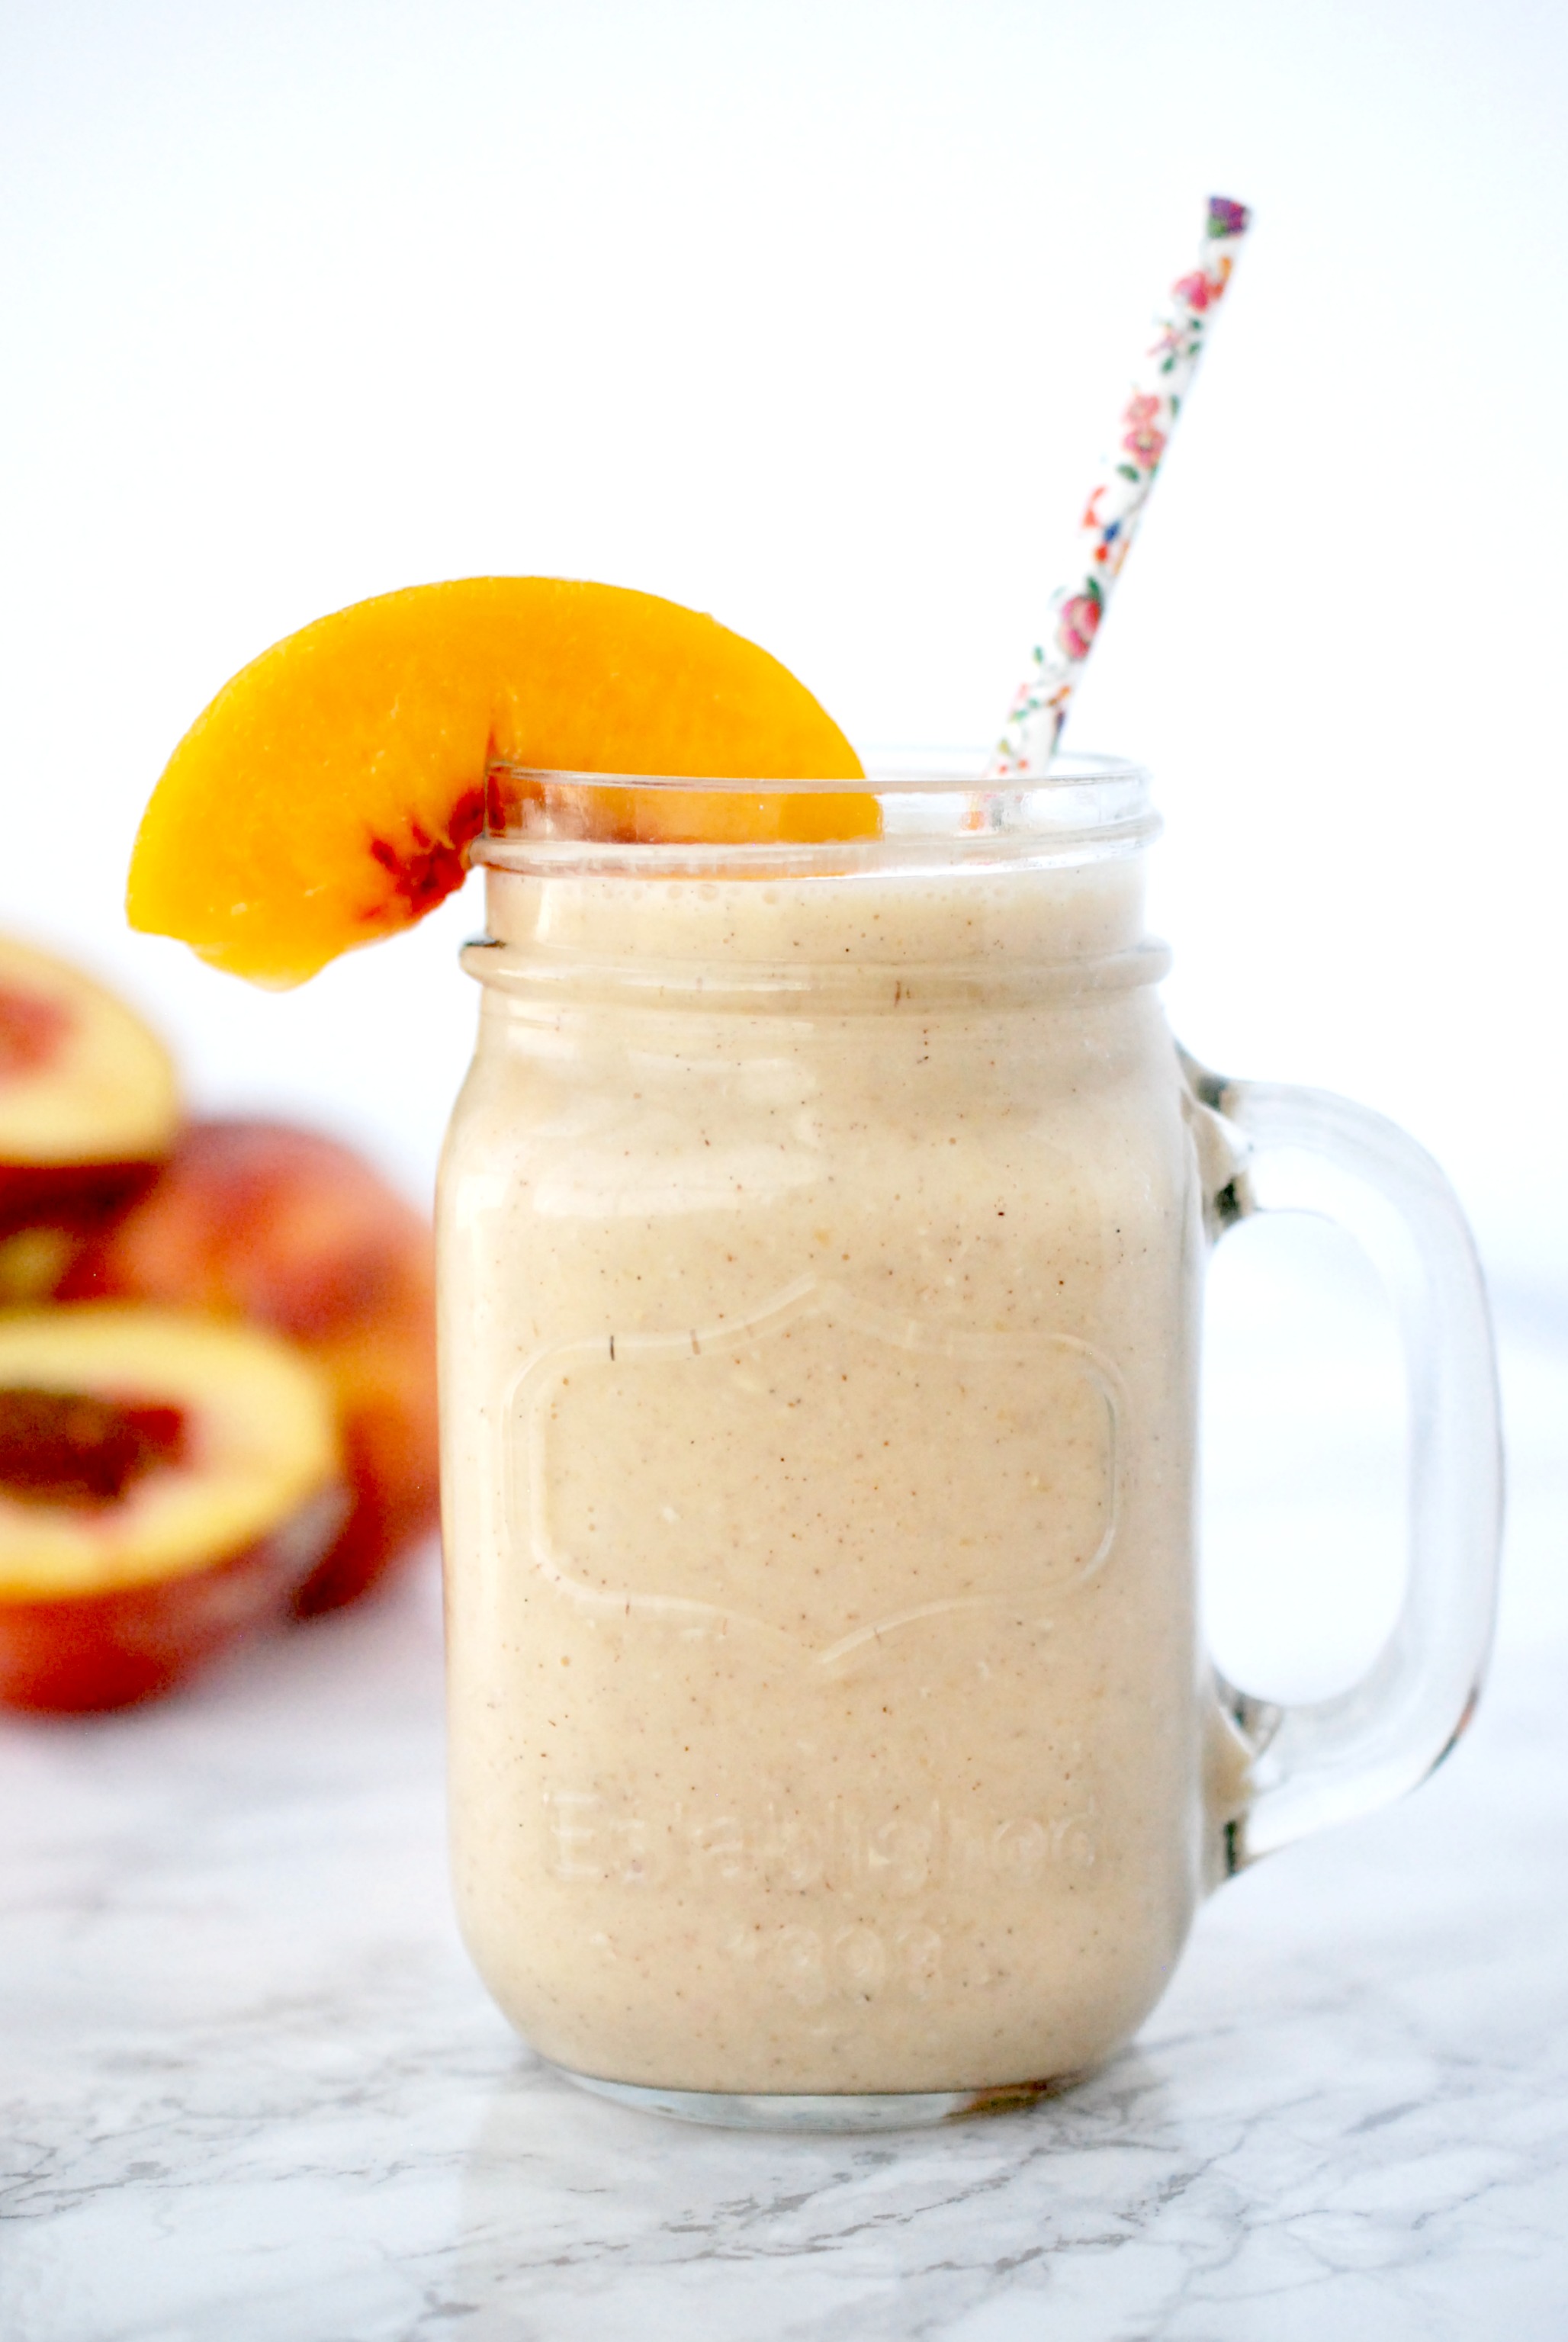 A rich, creamy and delicious smoothie that tastes just like peach cobbler. Perfect for a snack, dessert or breakfast on the go!